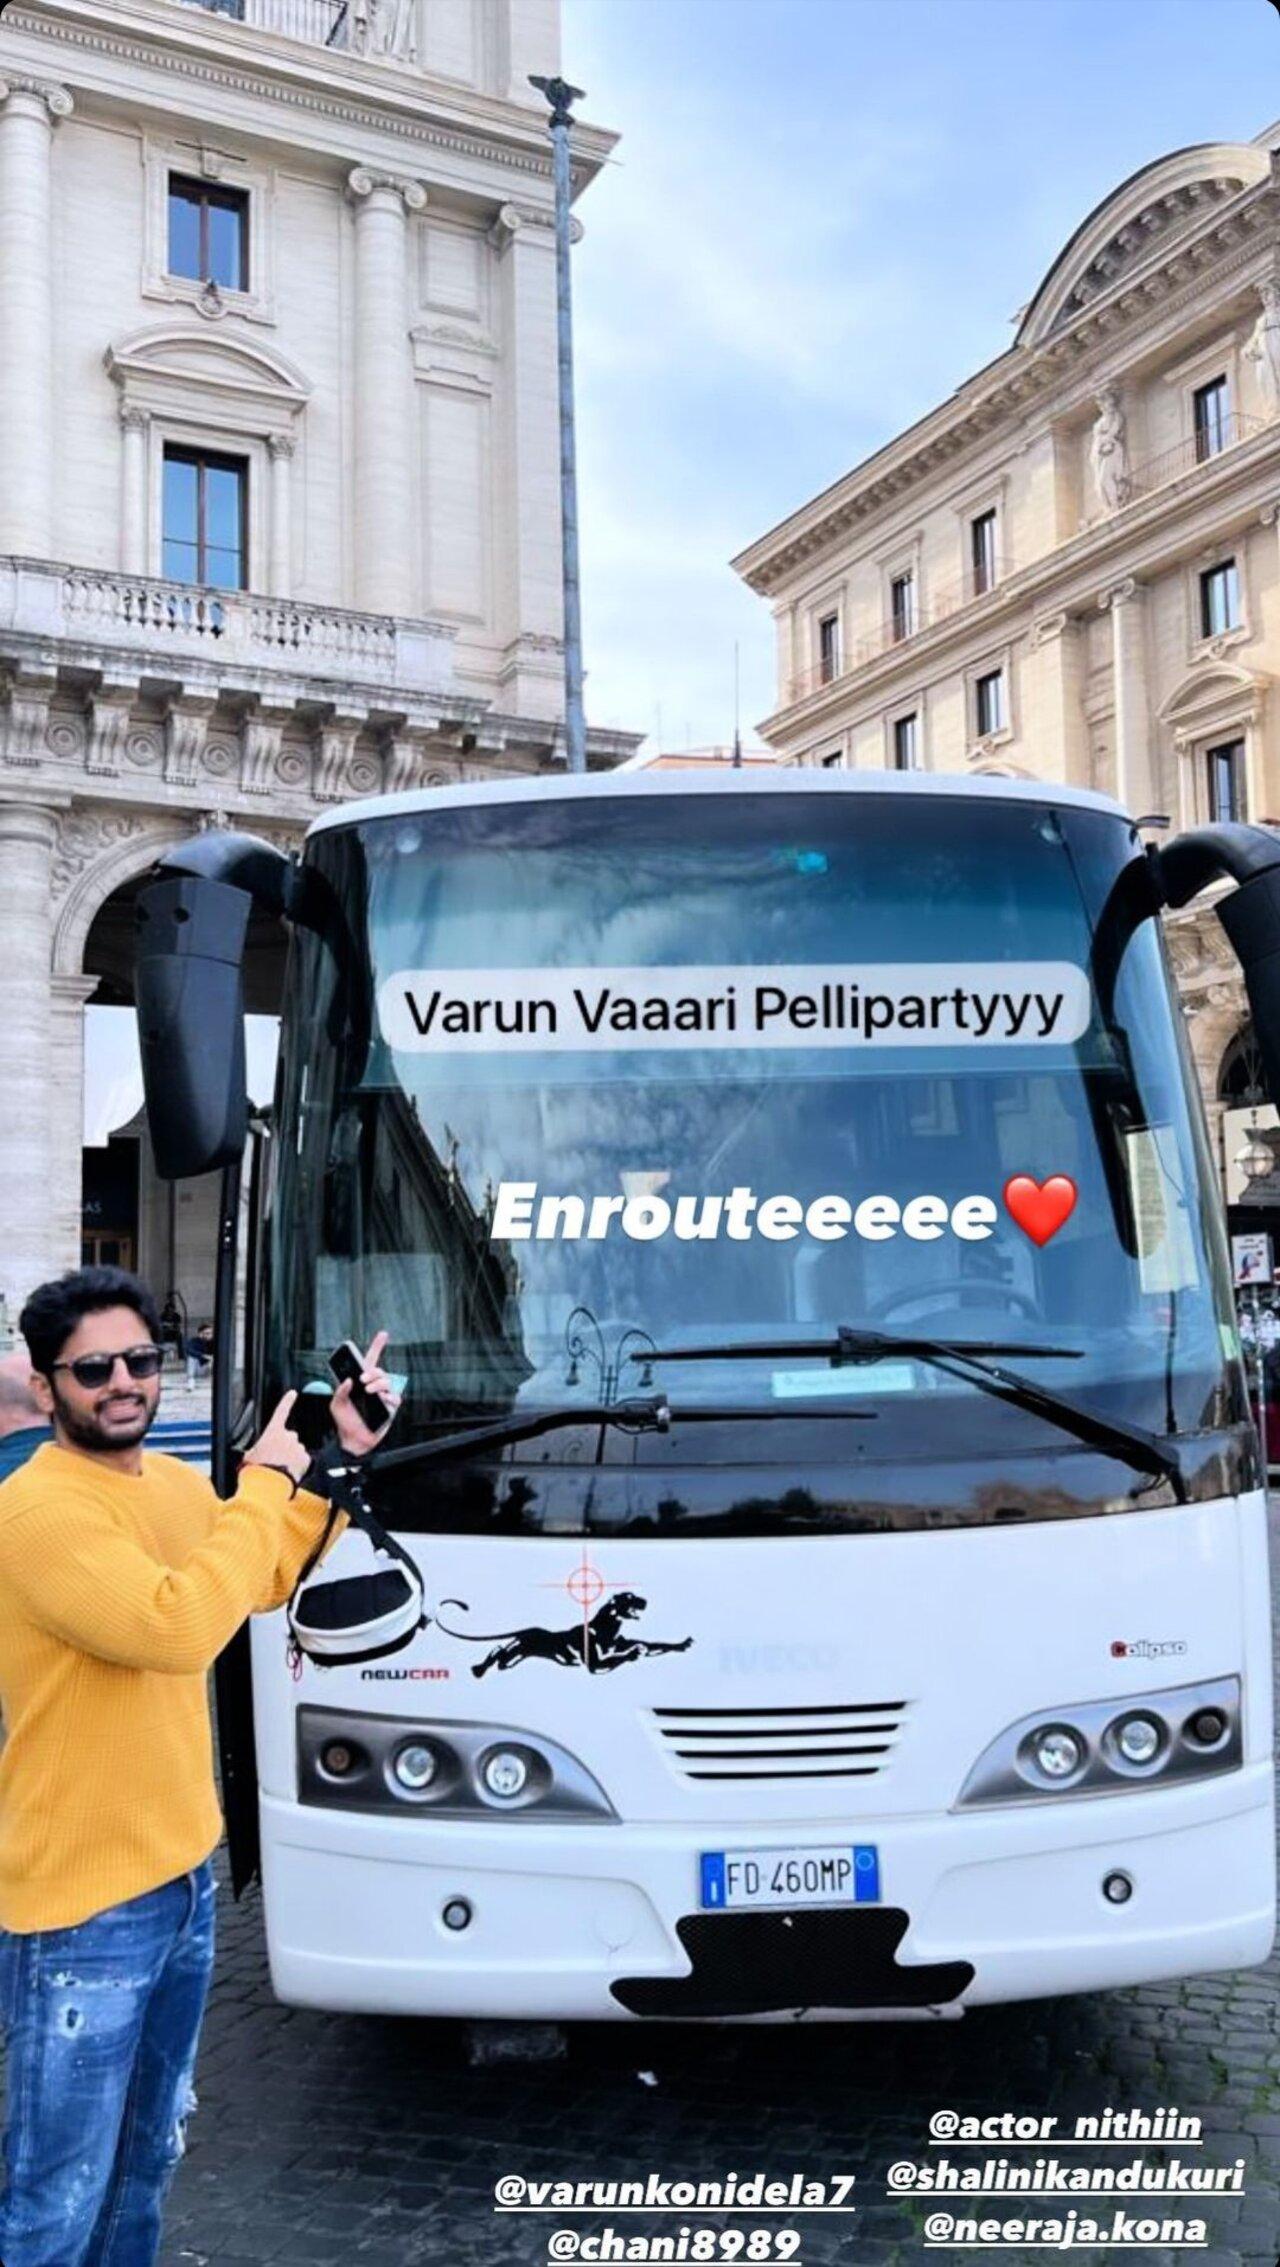 Actor Nithiin who is a part of the wedding posted a picture of him posing by the bus for Varun's guests. They toured Rome and reached Tuscany via bus